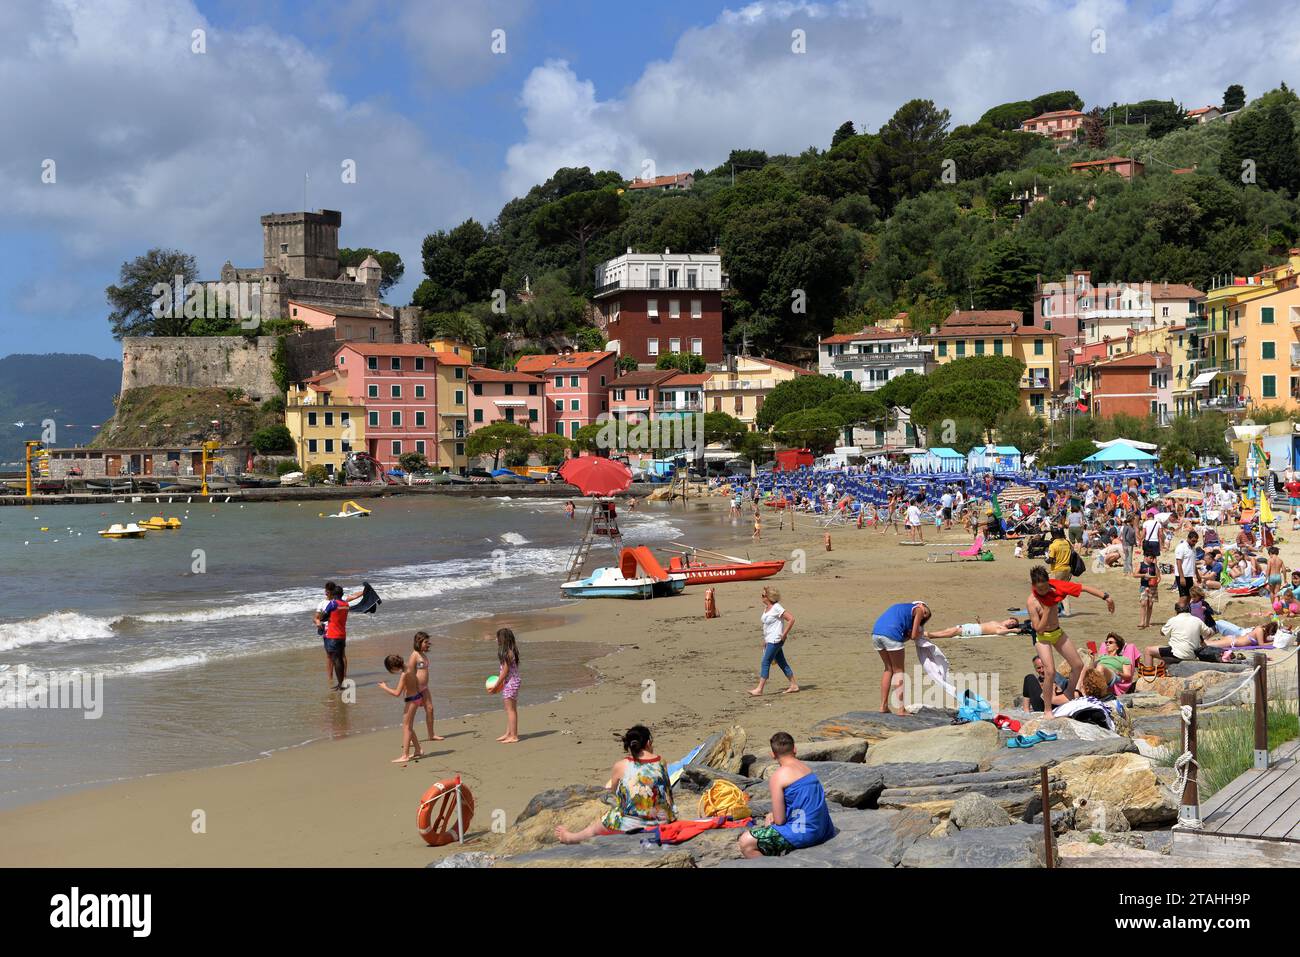 SAN TERENZO, LERICI, ITALY - JUNE 16, 2016: San Terenzo (St. Terenzo) beach crowded with bathers people in a June day. Stock Photo